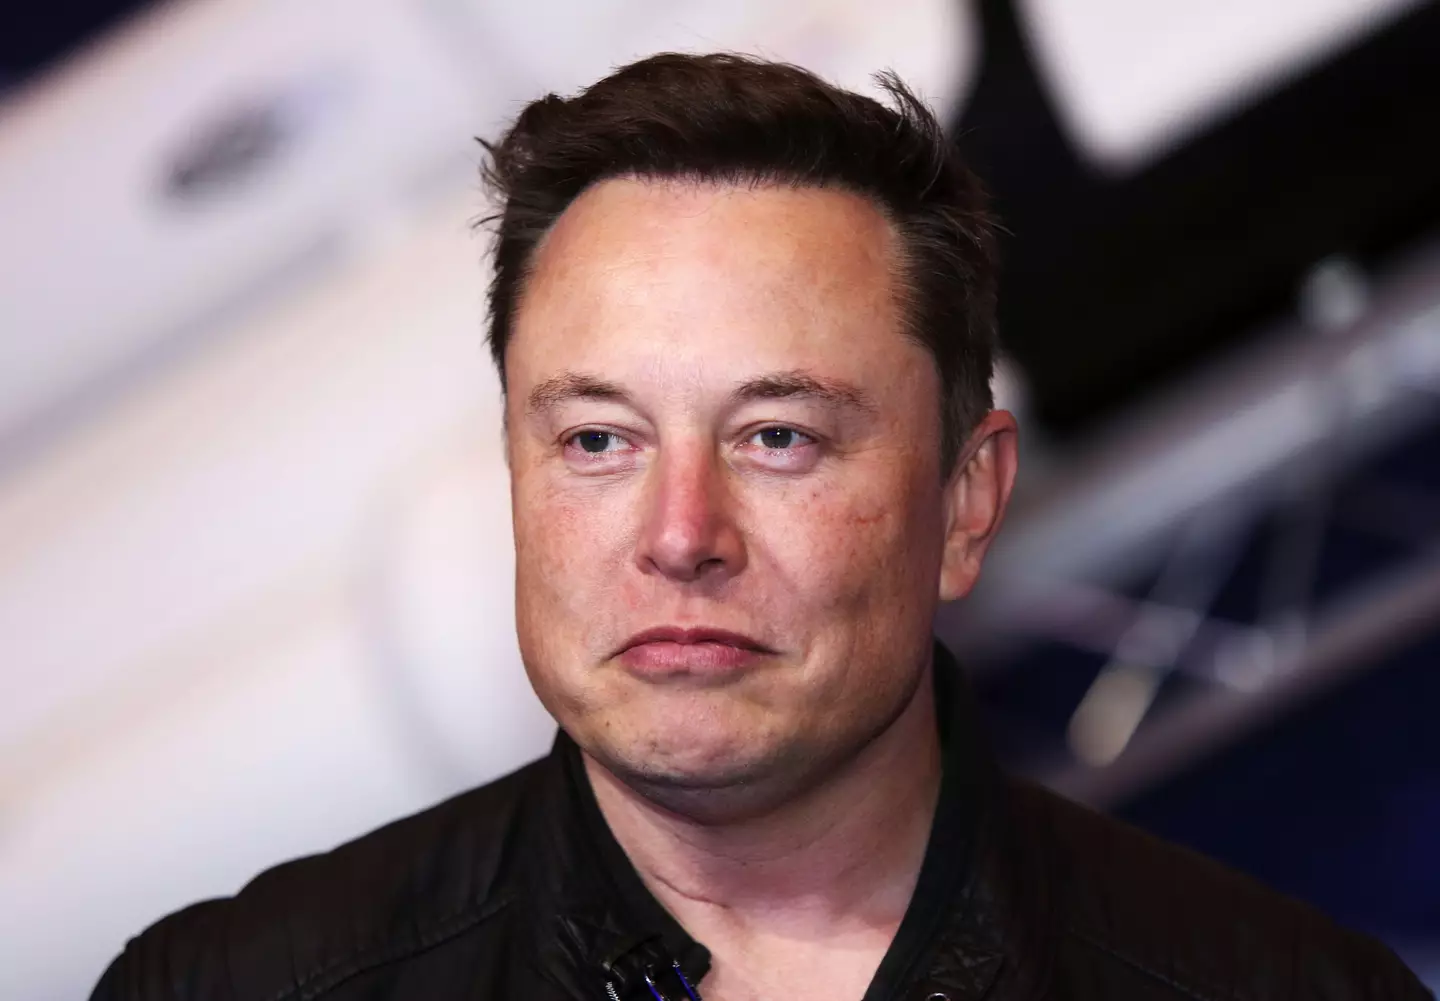 Elon Musk's mum wants you to stop being mean to him.